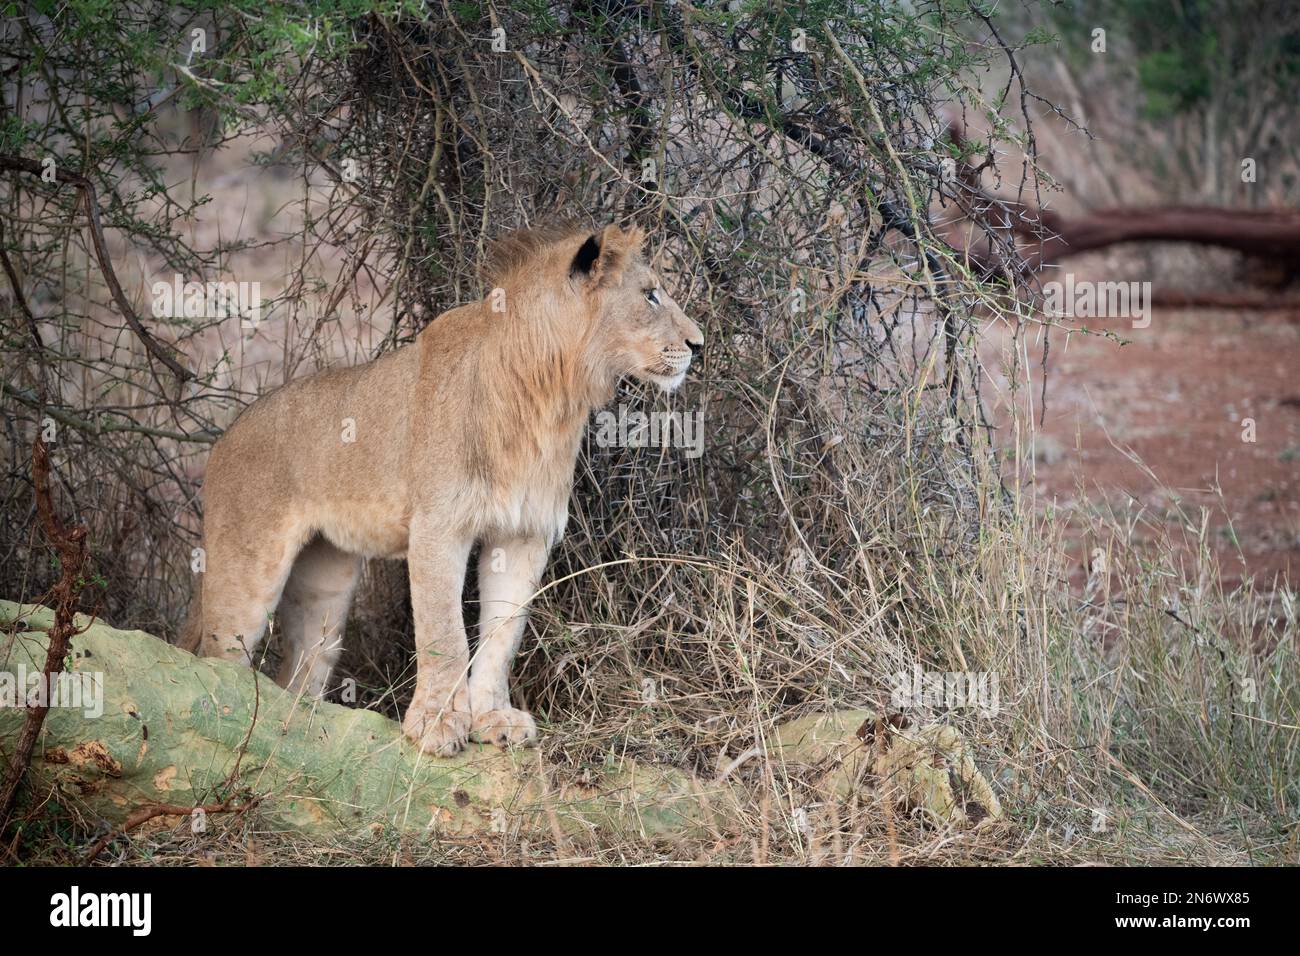 Juvenile male lion in late evening in South Africa Stock Photo